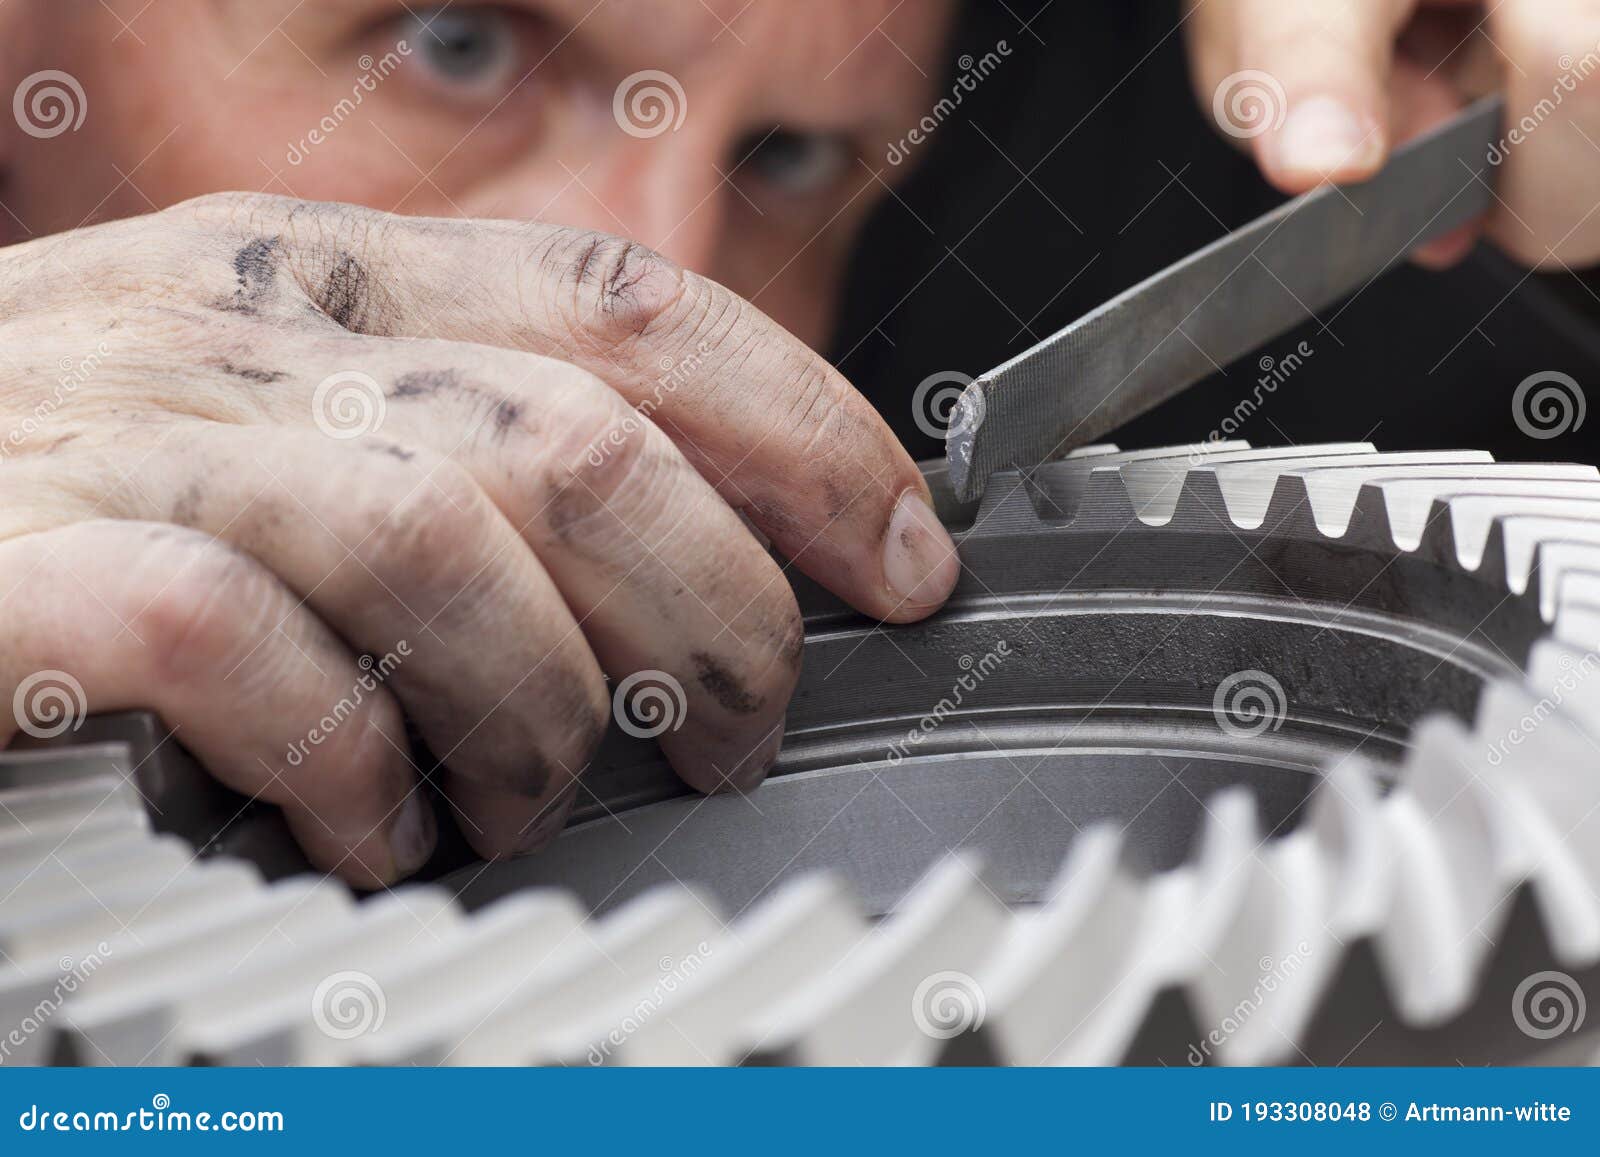 close-up of hands of a mechanic repairing a cog wheel with a rasp